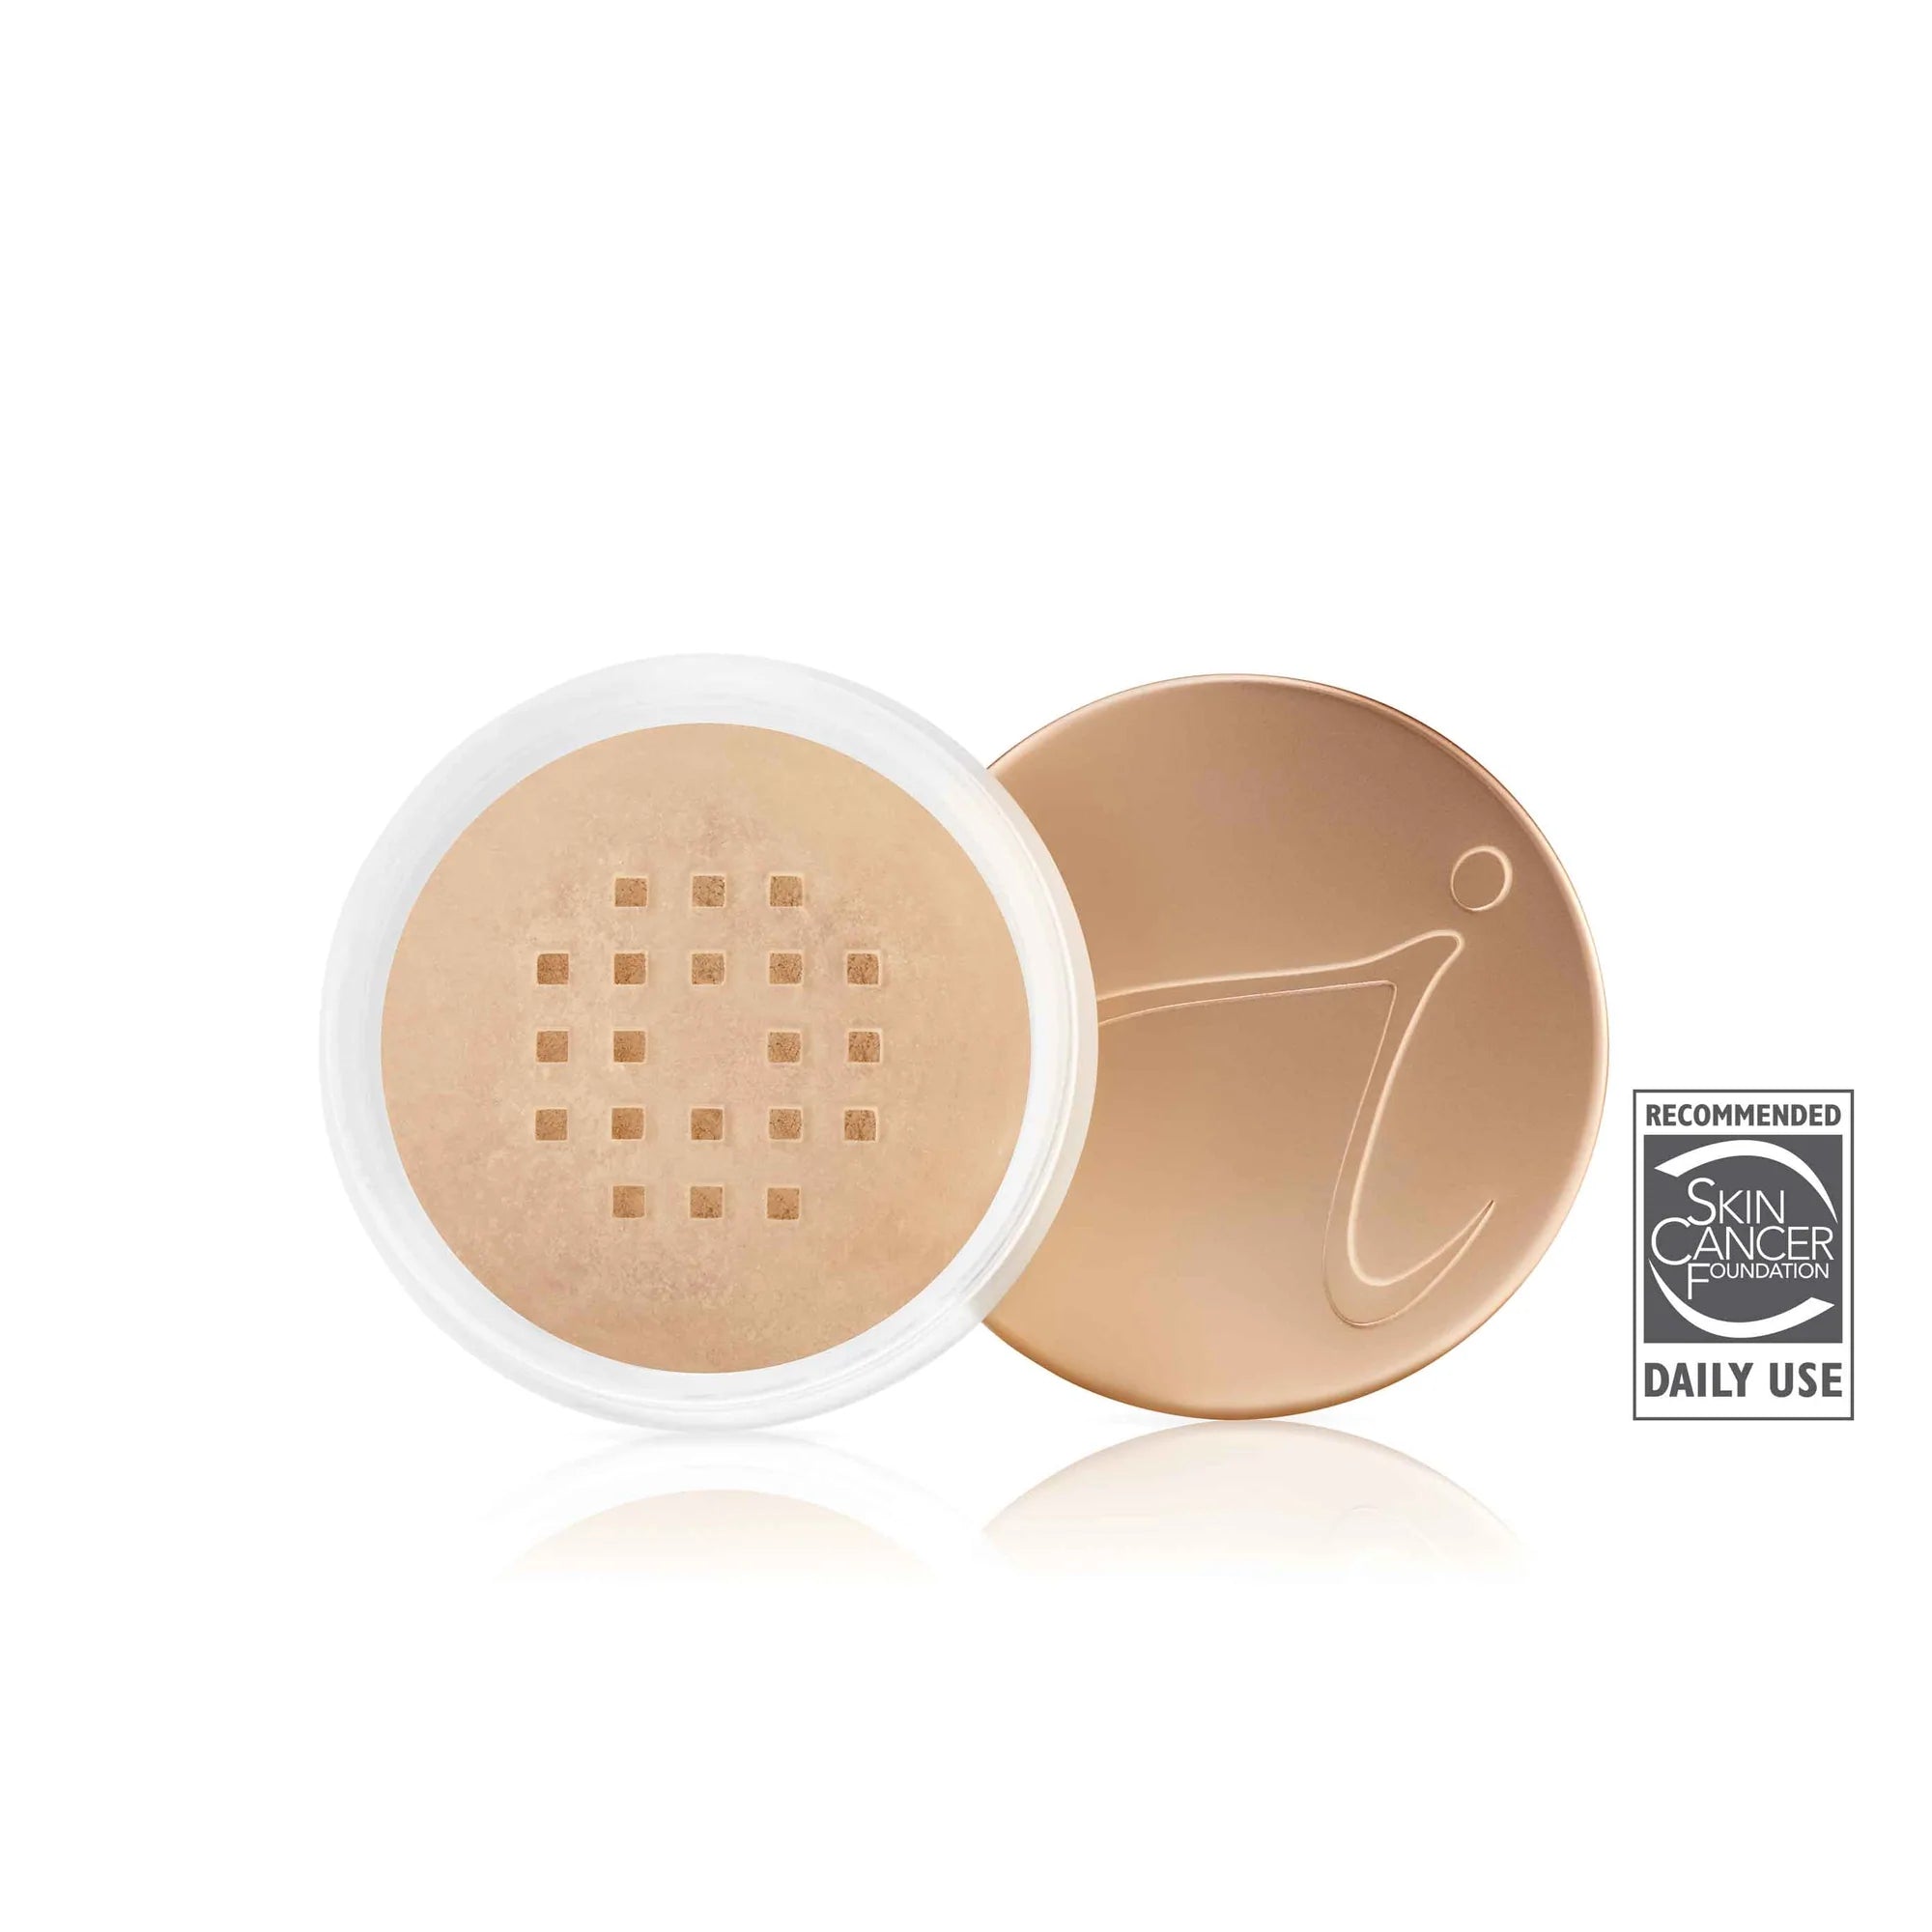 Amazing Base® Loose Mineral Powder SPF 20/15 [Best Before: Jan 2025]